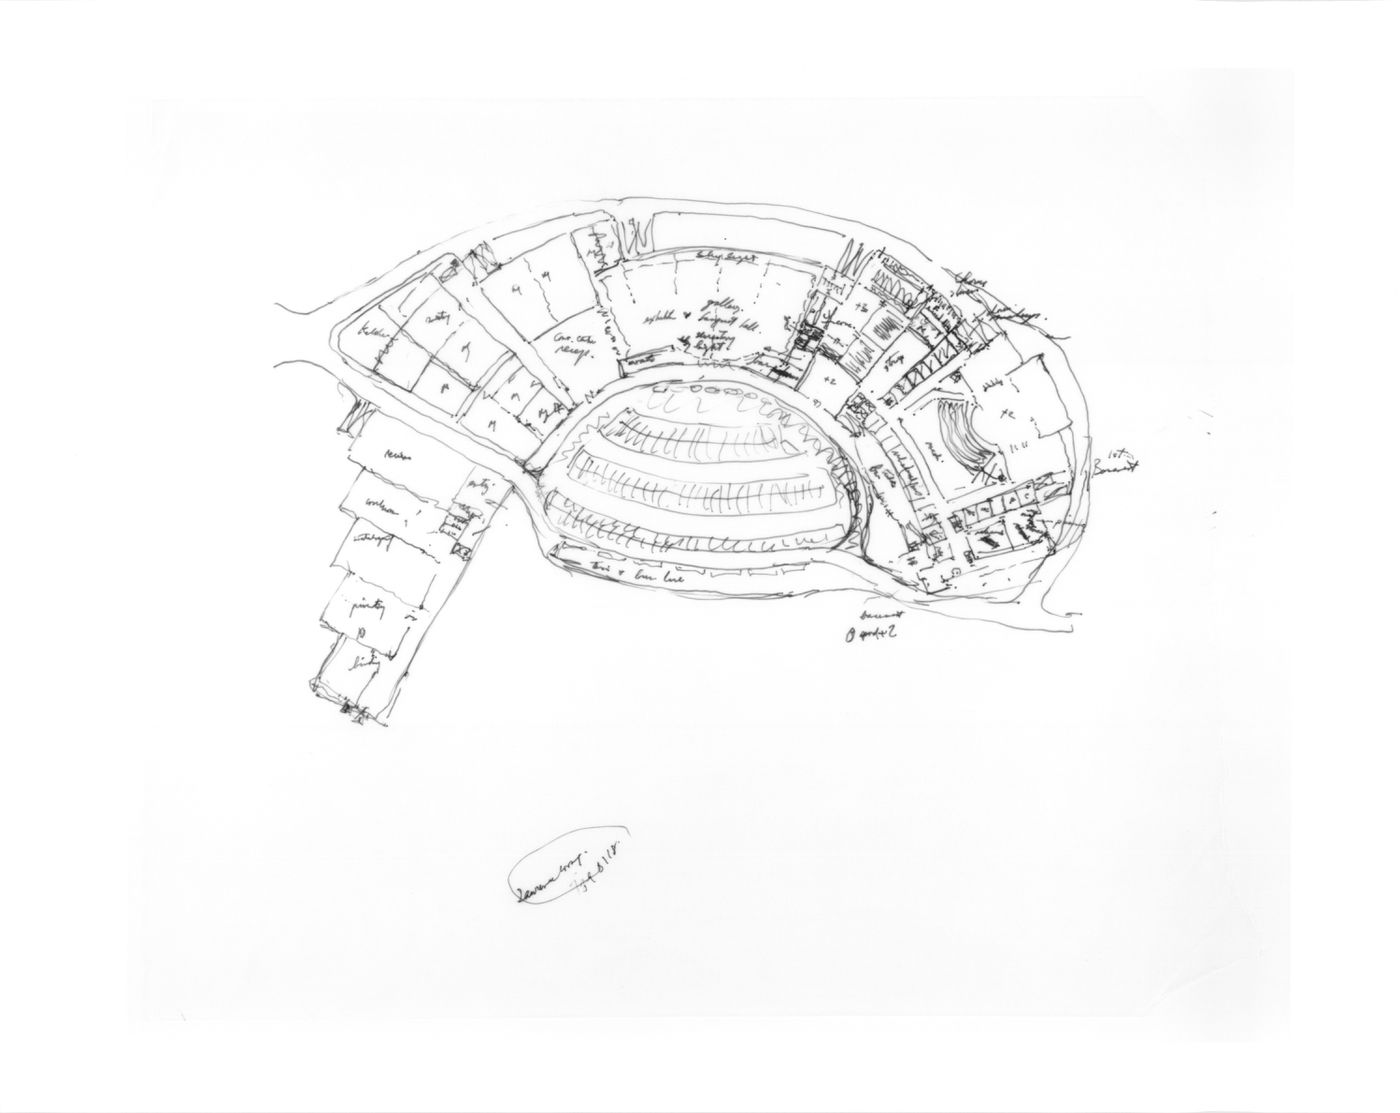 Floor plan for the Dalian Cultural Centre, China